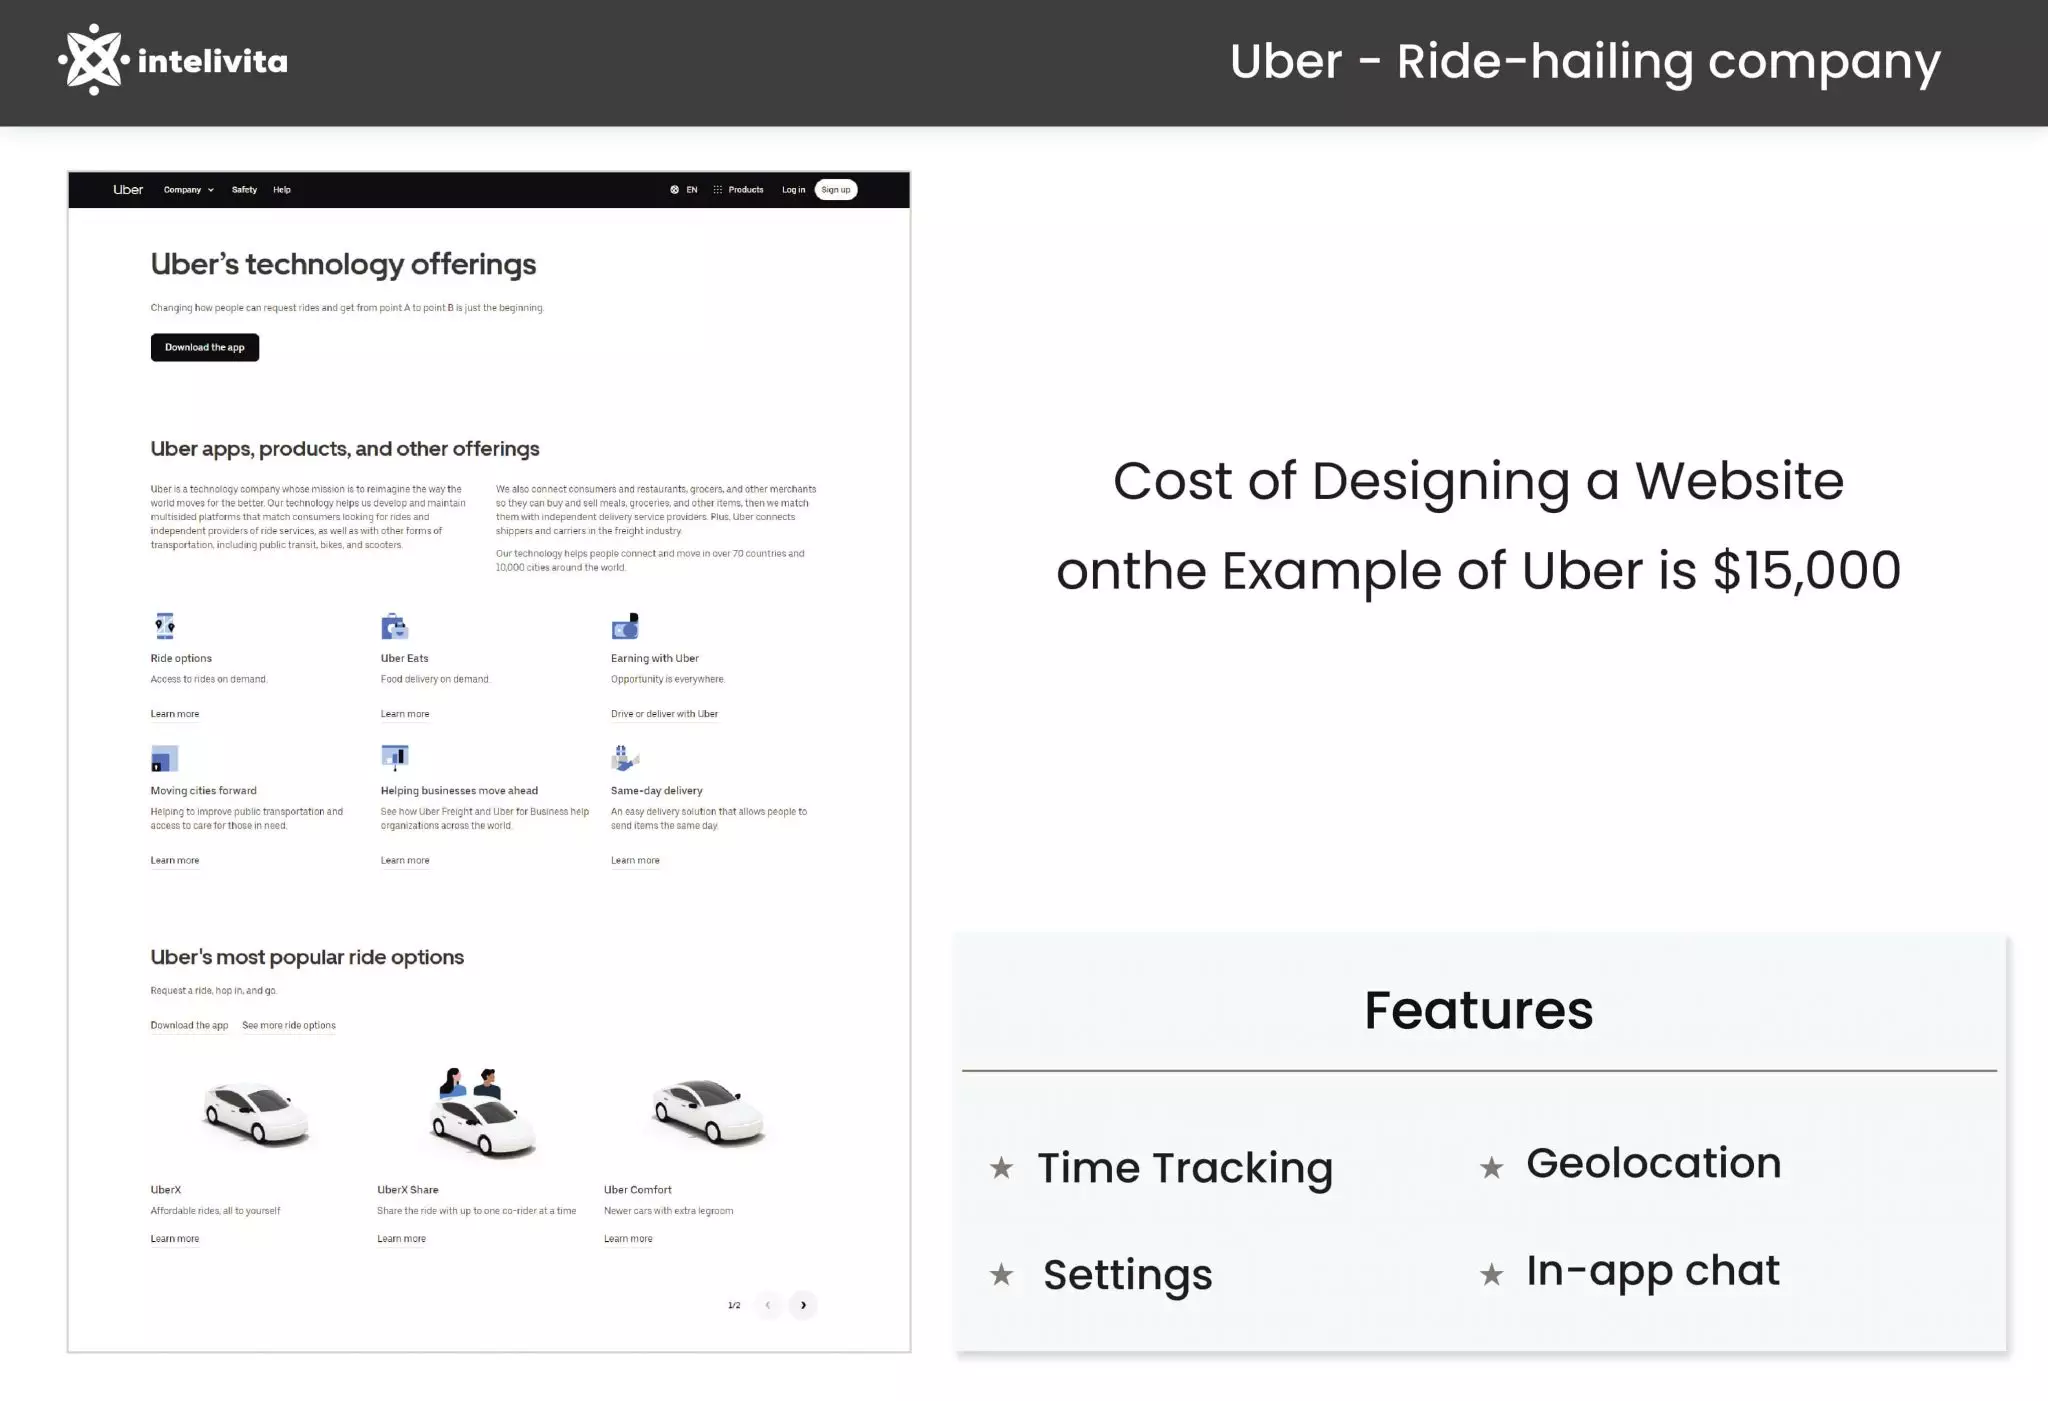 Image Displaying the Cost Estimate of Designing a Website Like Uber